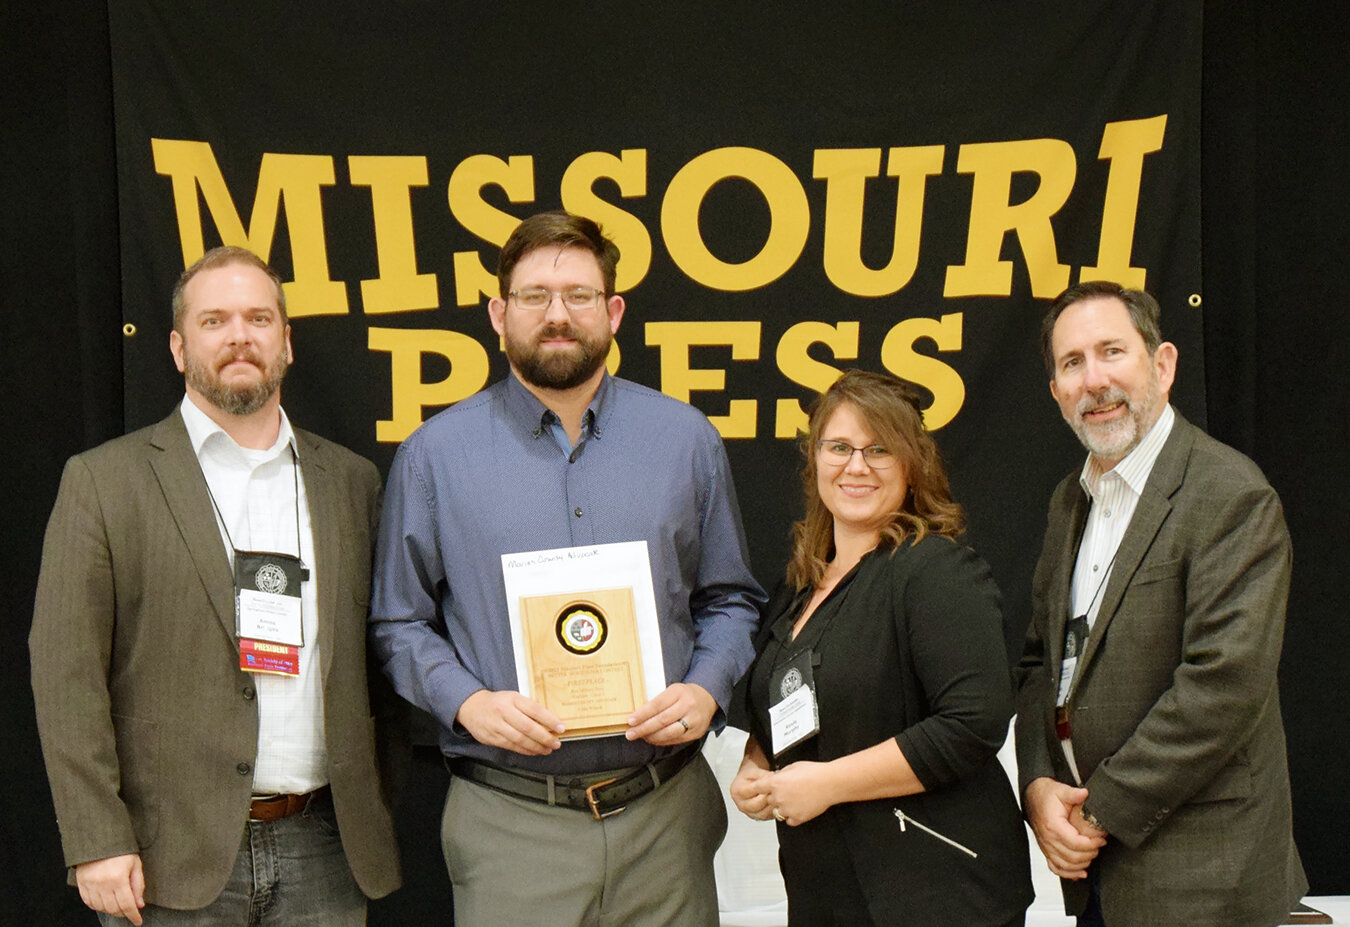 Maries County Advocate management and staff Jacob Warden, Roxie Murphy and Dennis Warden accept Missouri Press Association awards Saturday in St. Louis from Amos Bridges, incoming president.